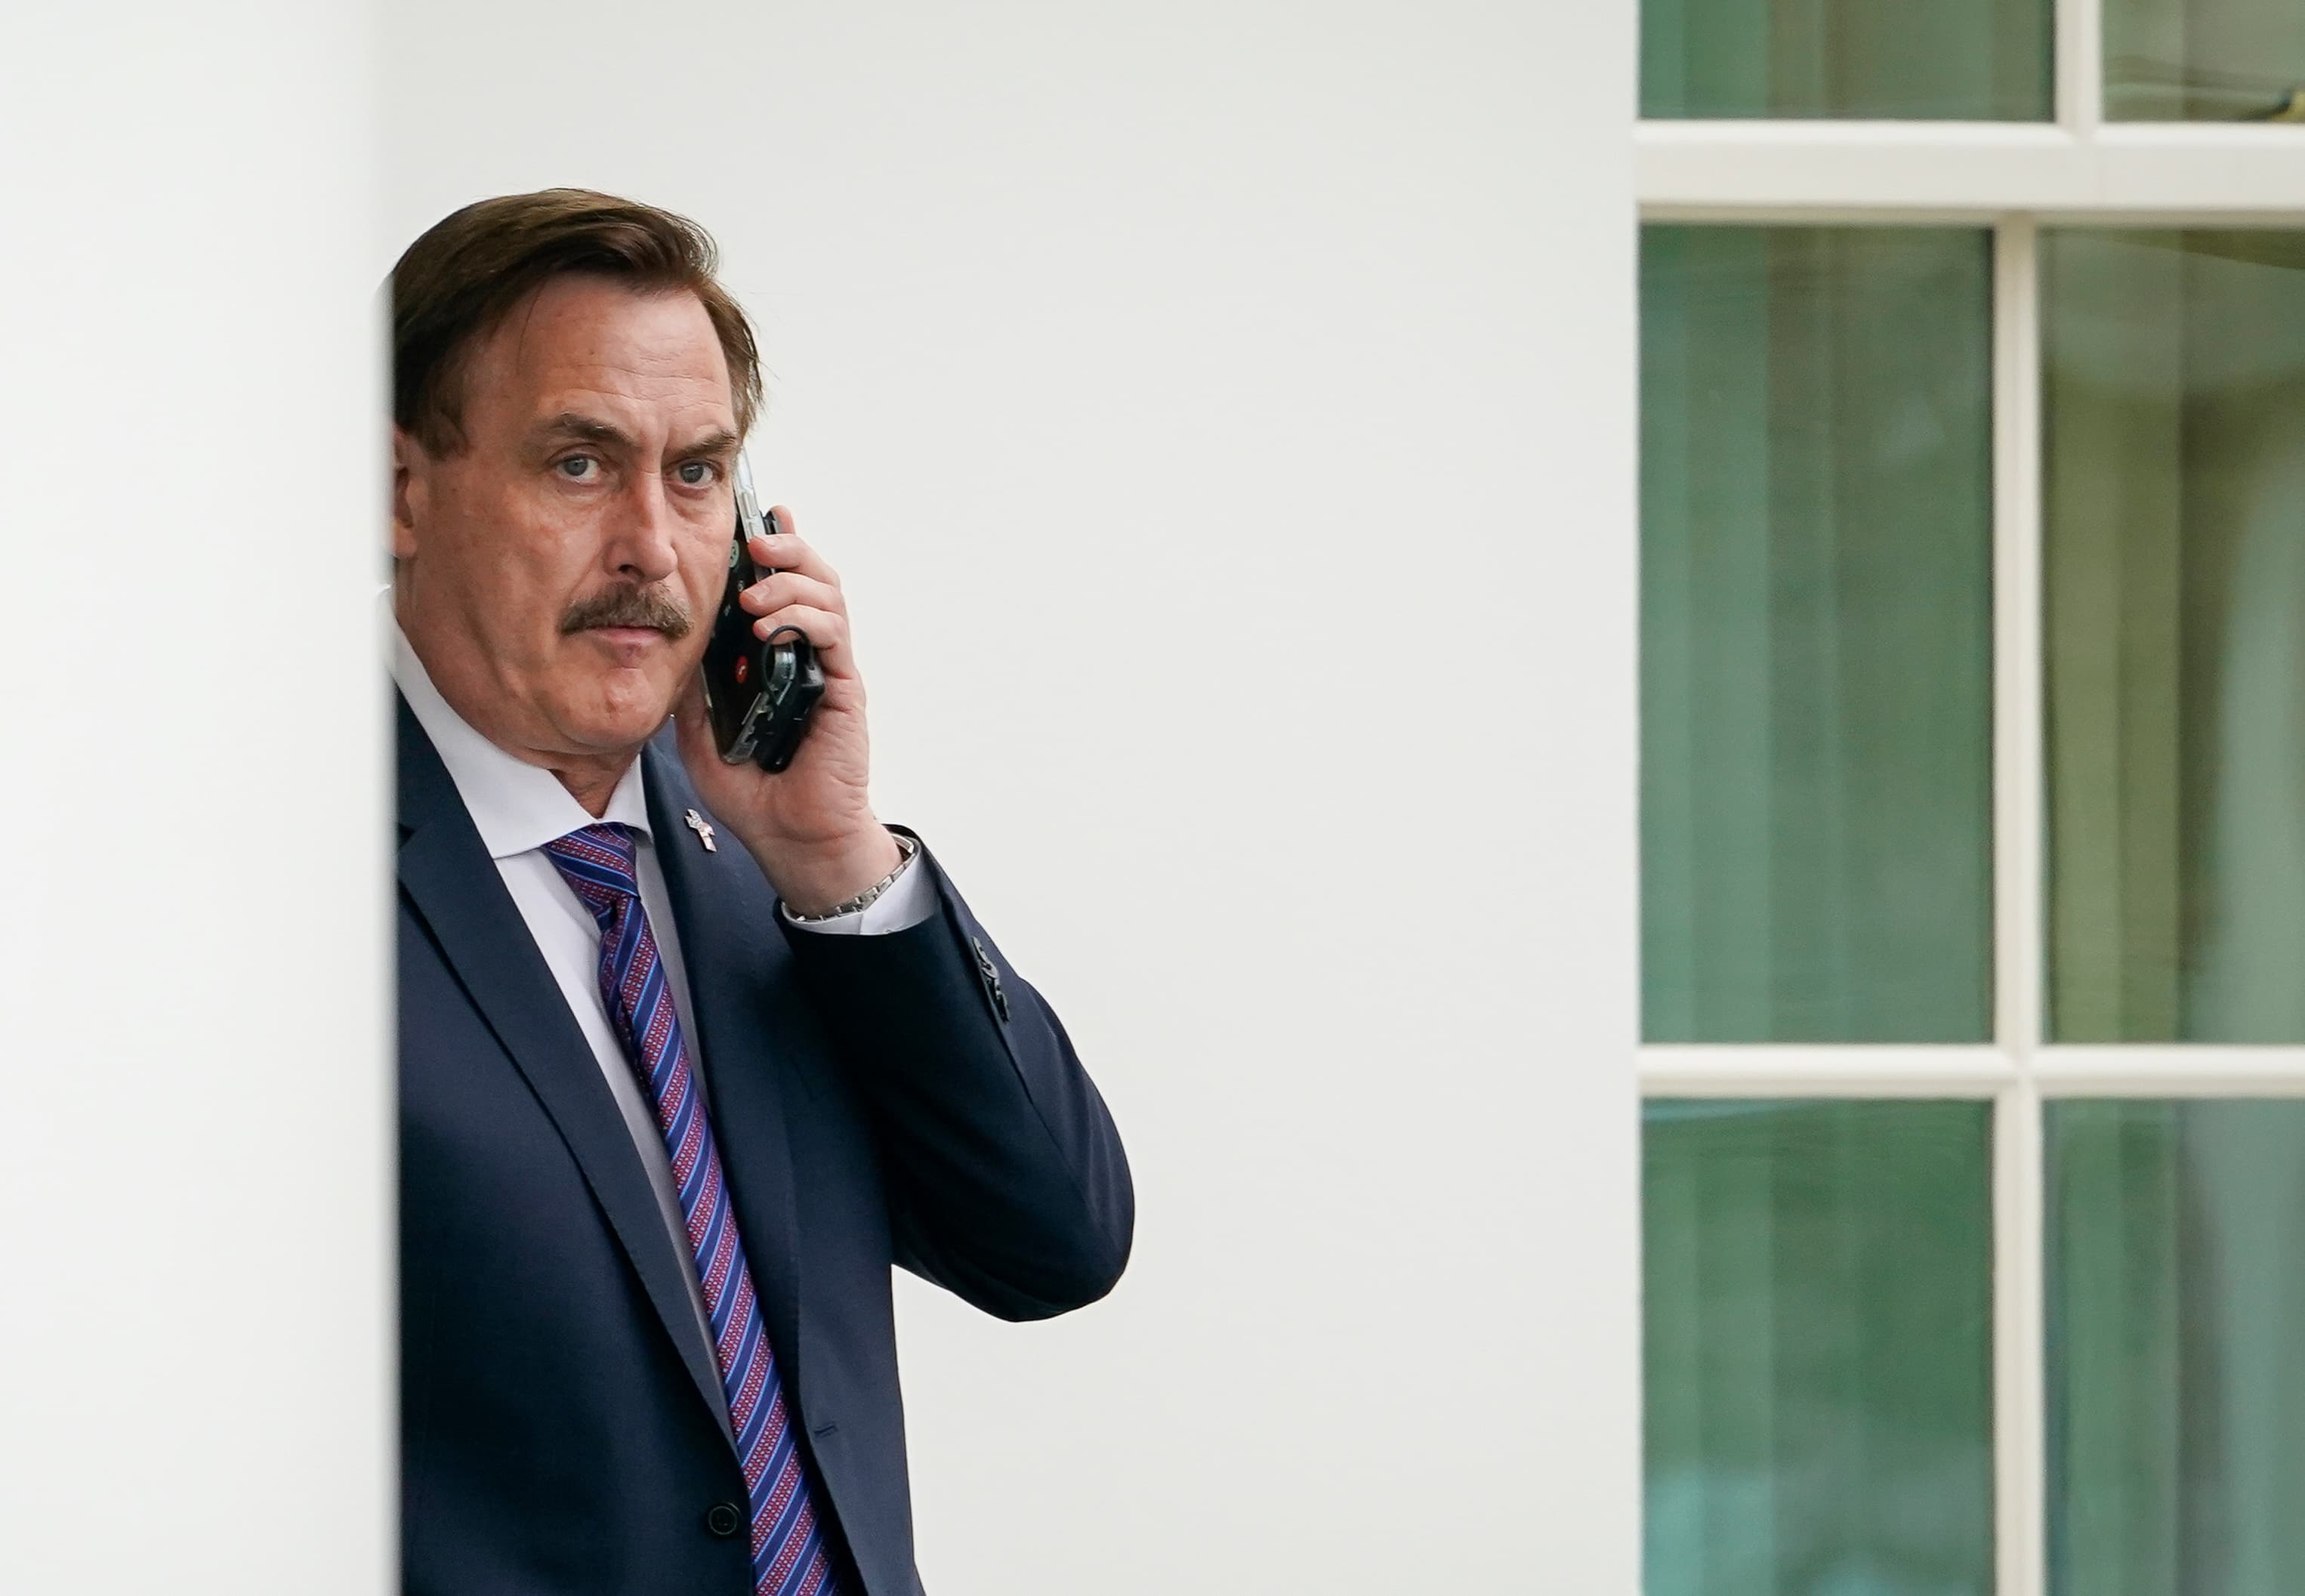  New Movie by Mike Lindell claims to prove that 2020 election was rigged